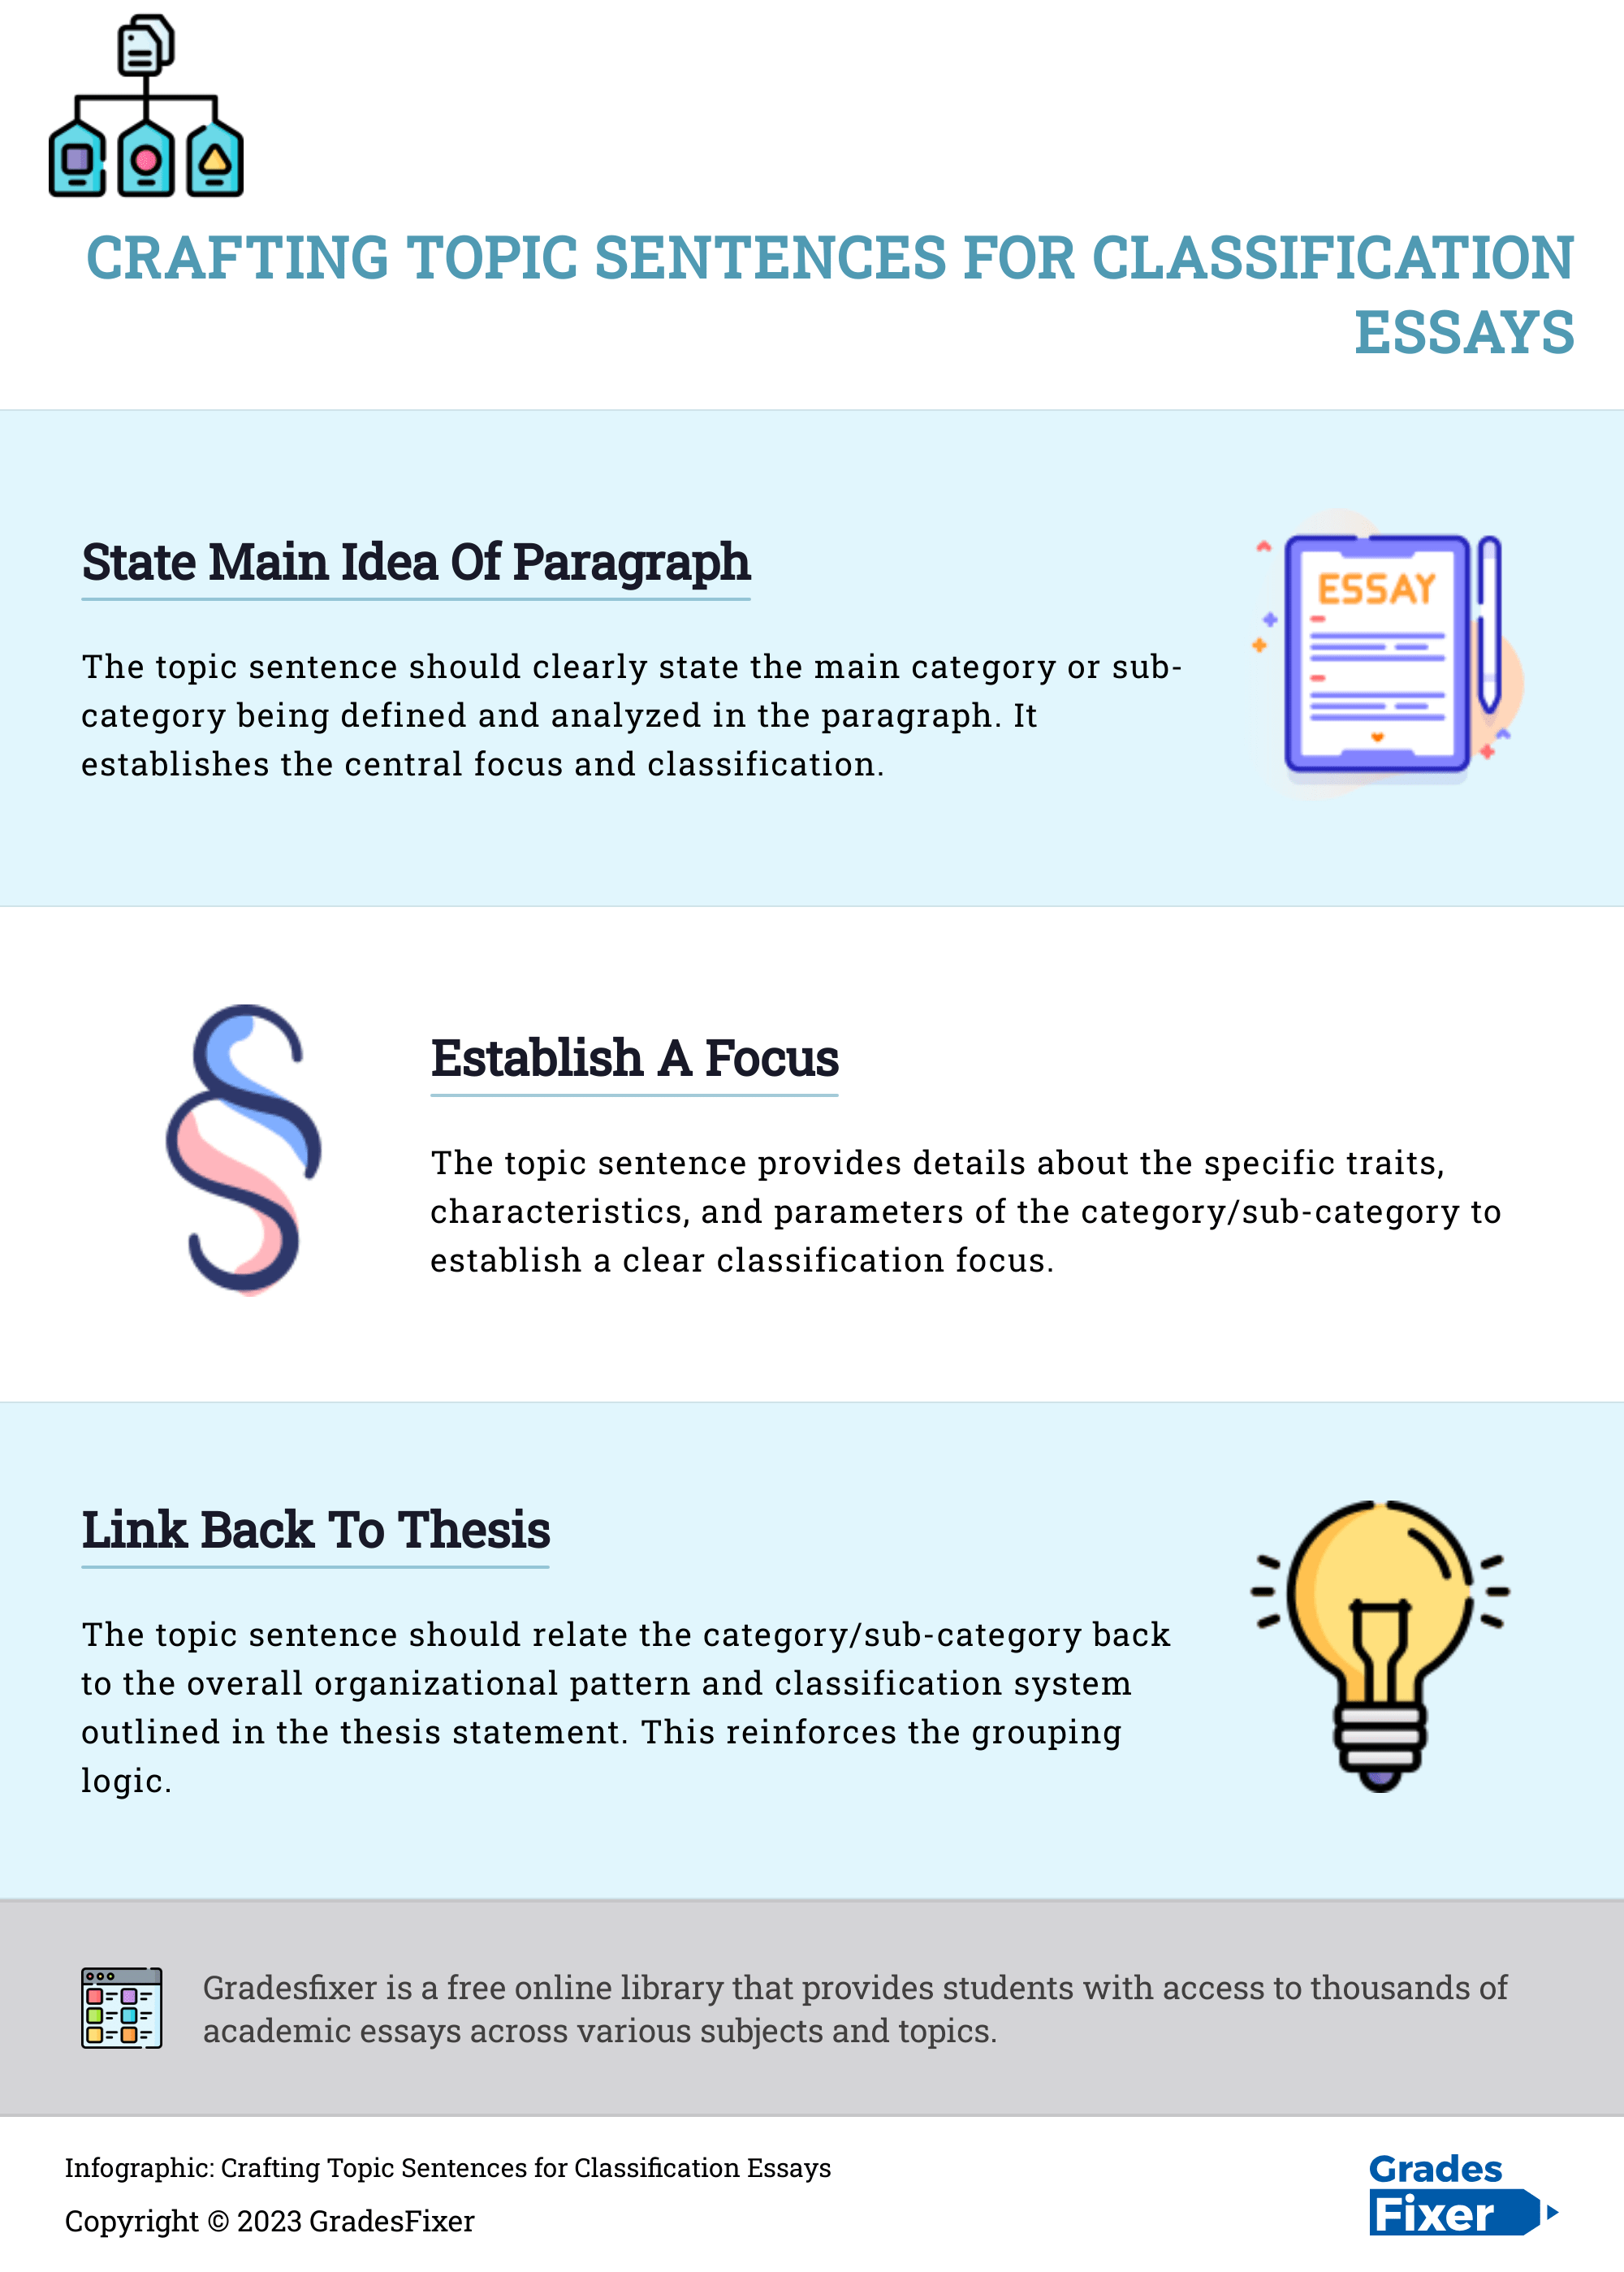 Infographic-Crafting-Topic-Sentences-for-Classification-Essays